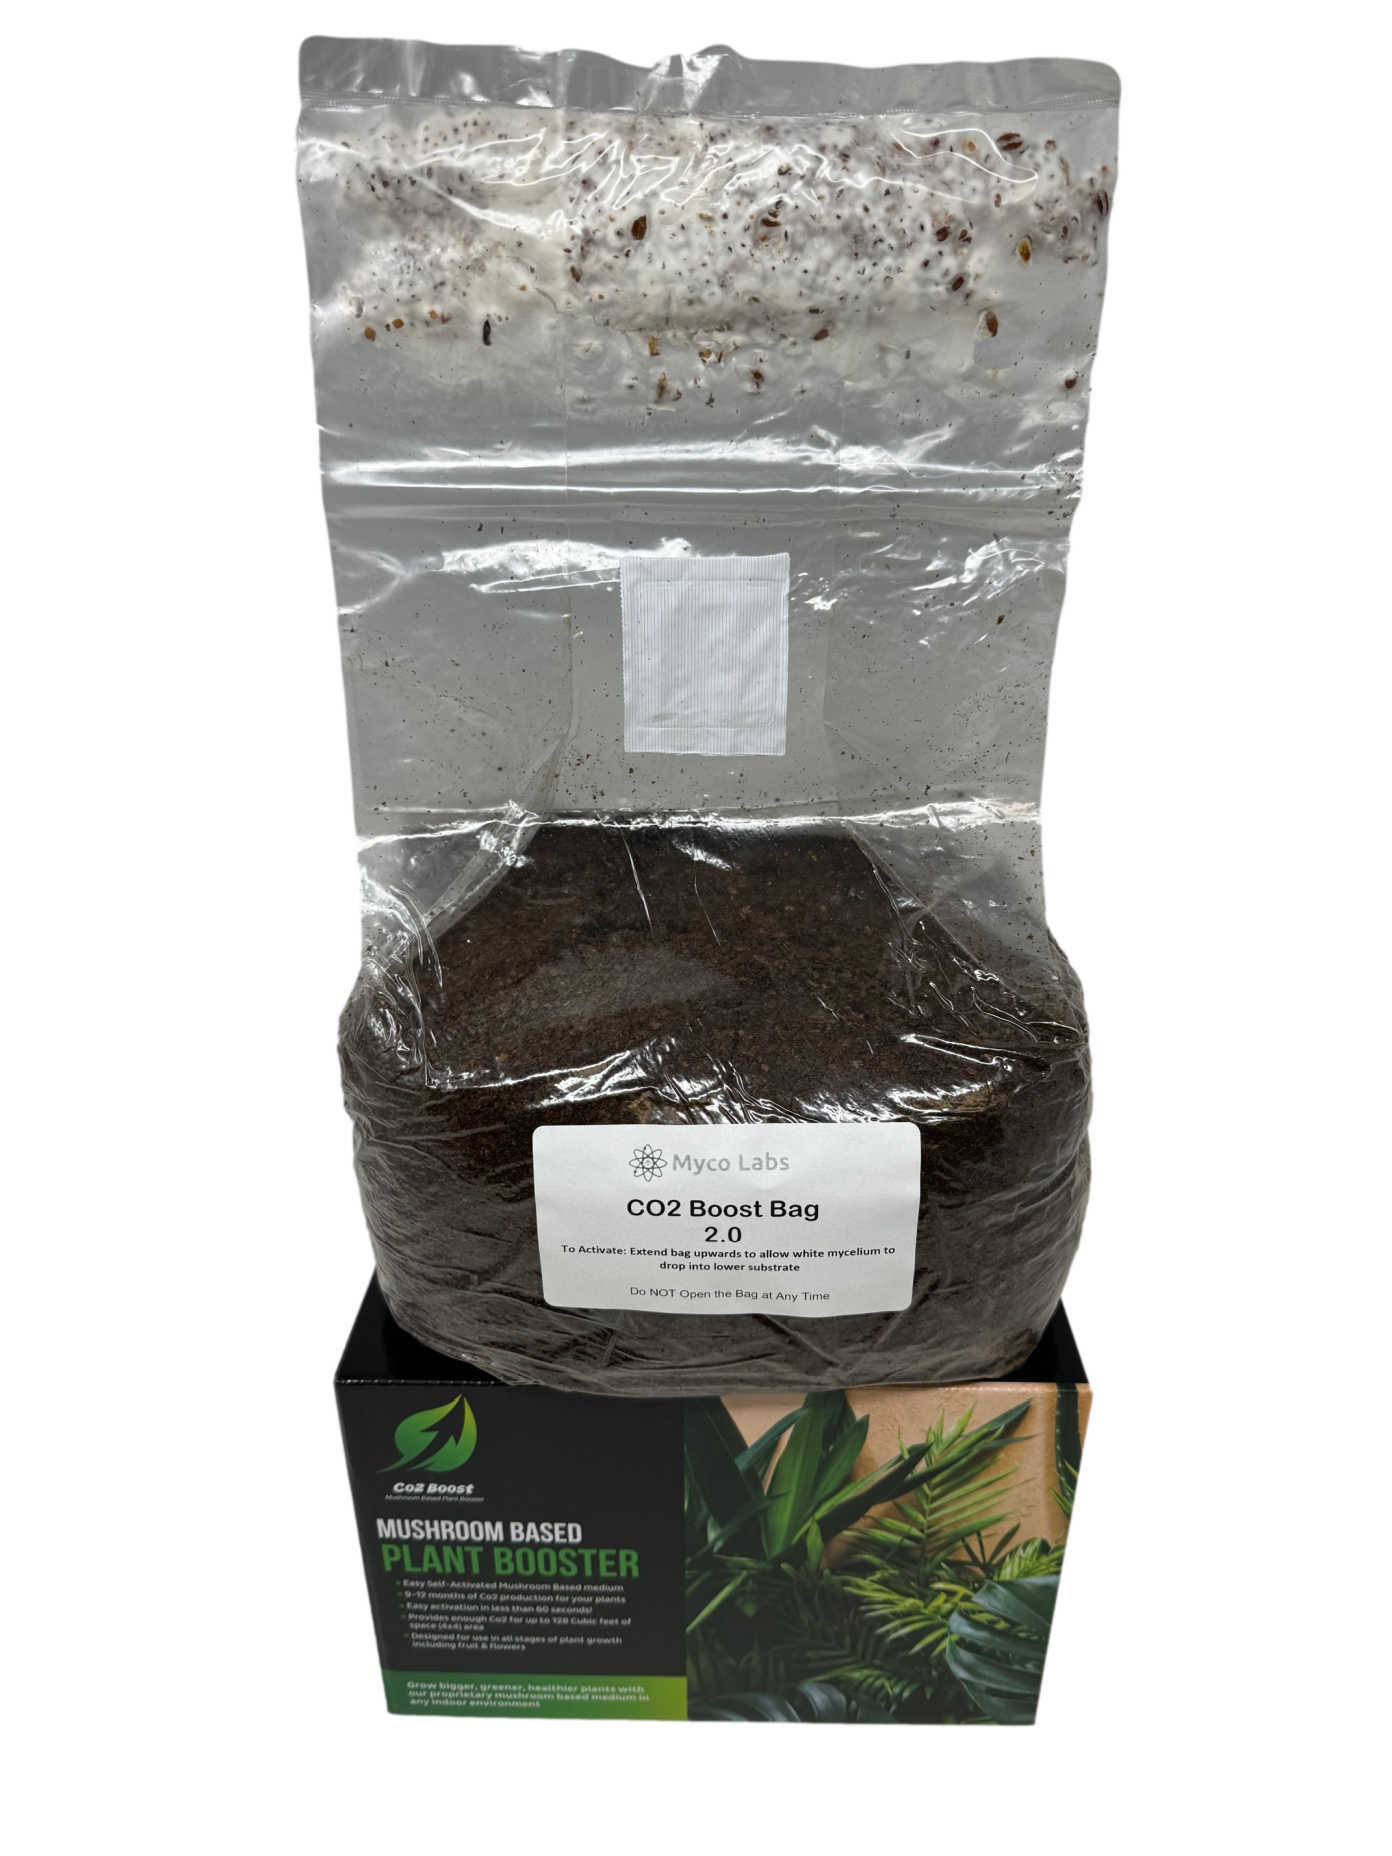 https://www.mycolabs.com/resize/Shared/Images/Product/Co2-Boost-Self-Activated-Bag-for-Plants-Grow-Rooms-2-0/Co2_20_extend.jpg?bw=1000&w=1000&bh=1000&h=1000